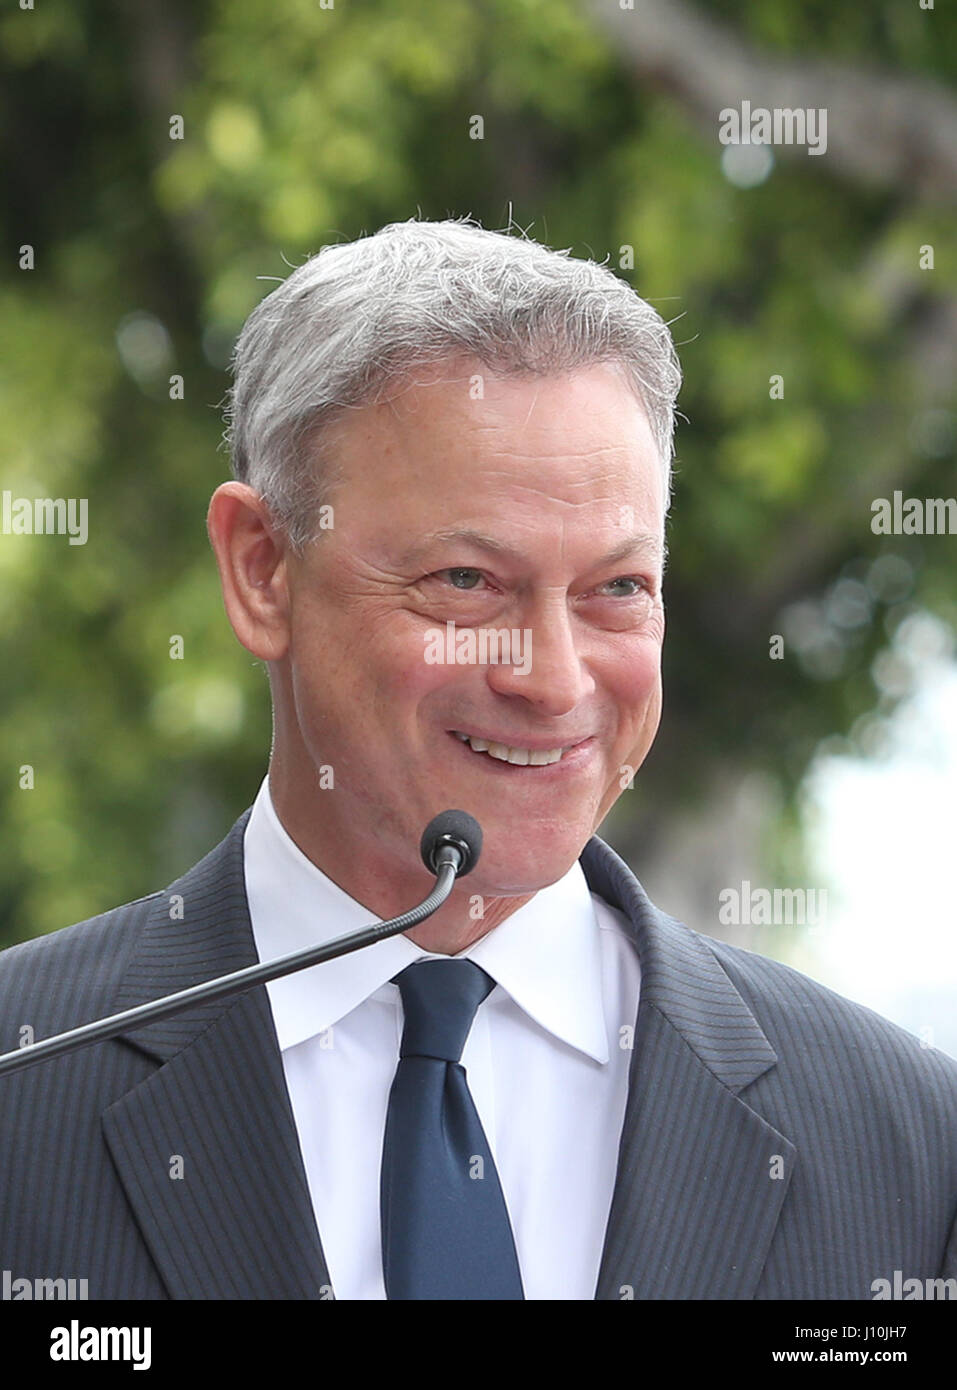 Hollywood, Ca. 17th Apr, 2017. Gary Sinise, At Gary Sinise Honored With Star On The Hollywood Walk Of Fame At The Hollywood Walk Of Fame In California on April 17, 2017. Credit: Fs/Media Punch/Alamy Live News Stock Photo